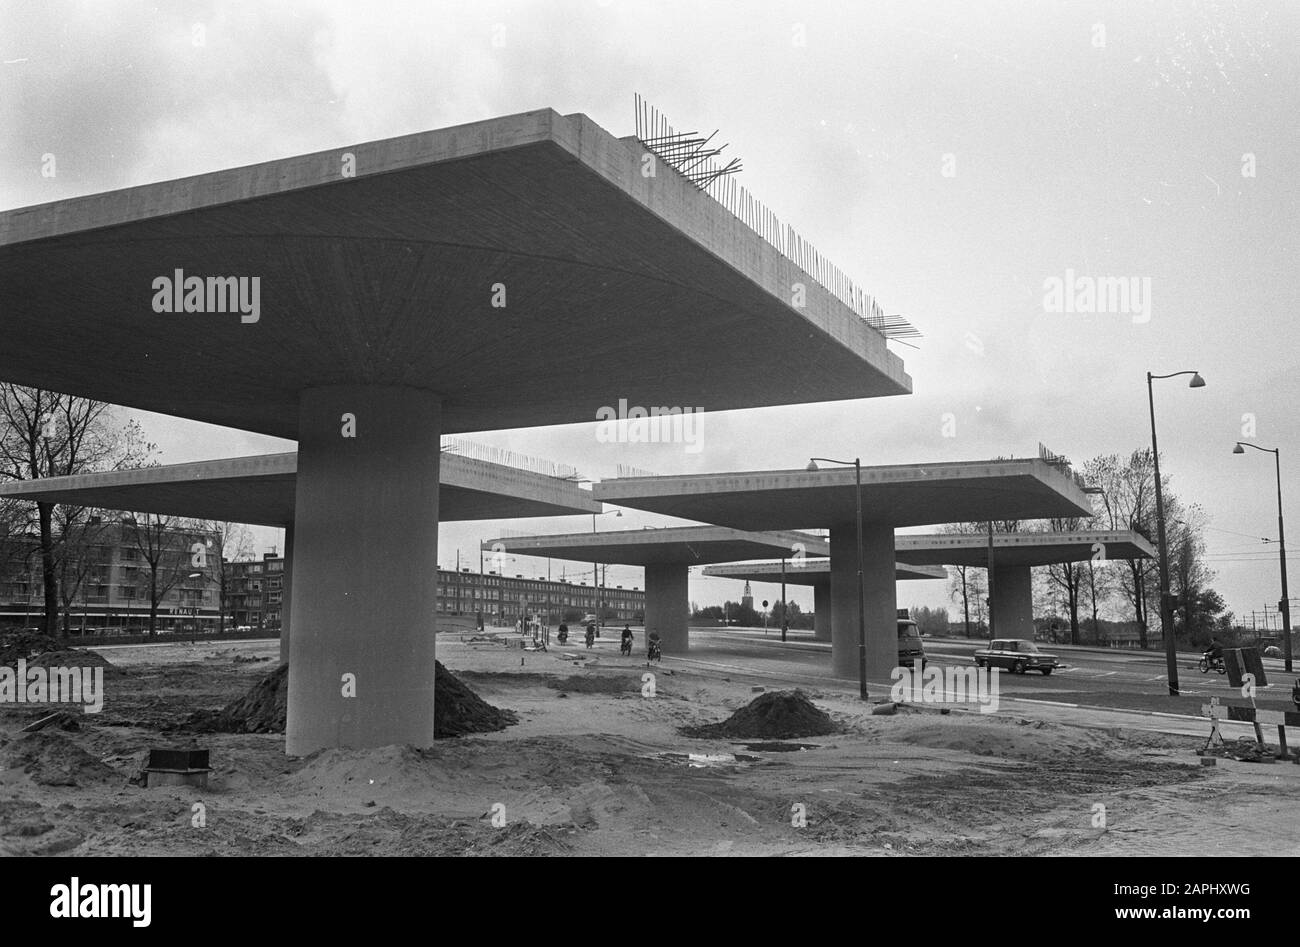 De Rotterdamse Ruit, six-lane bypass of Rotterdam. At the height of Overschie the road comes over a viaduct Date: 16 October 1967 Location: Overschie, Rotterdam Keywords: viaducts, roads Stock Photo